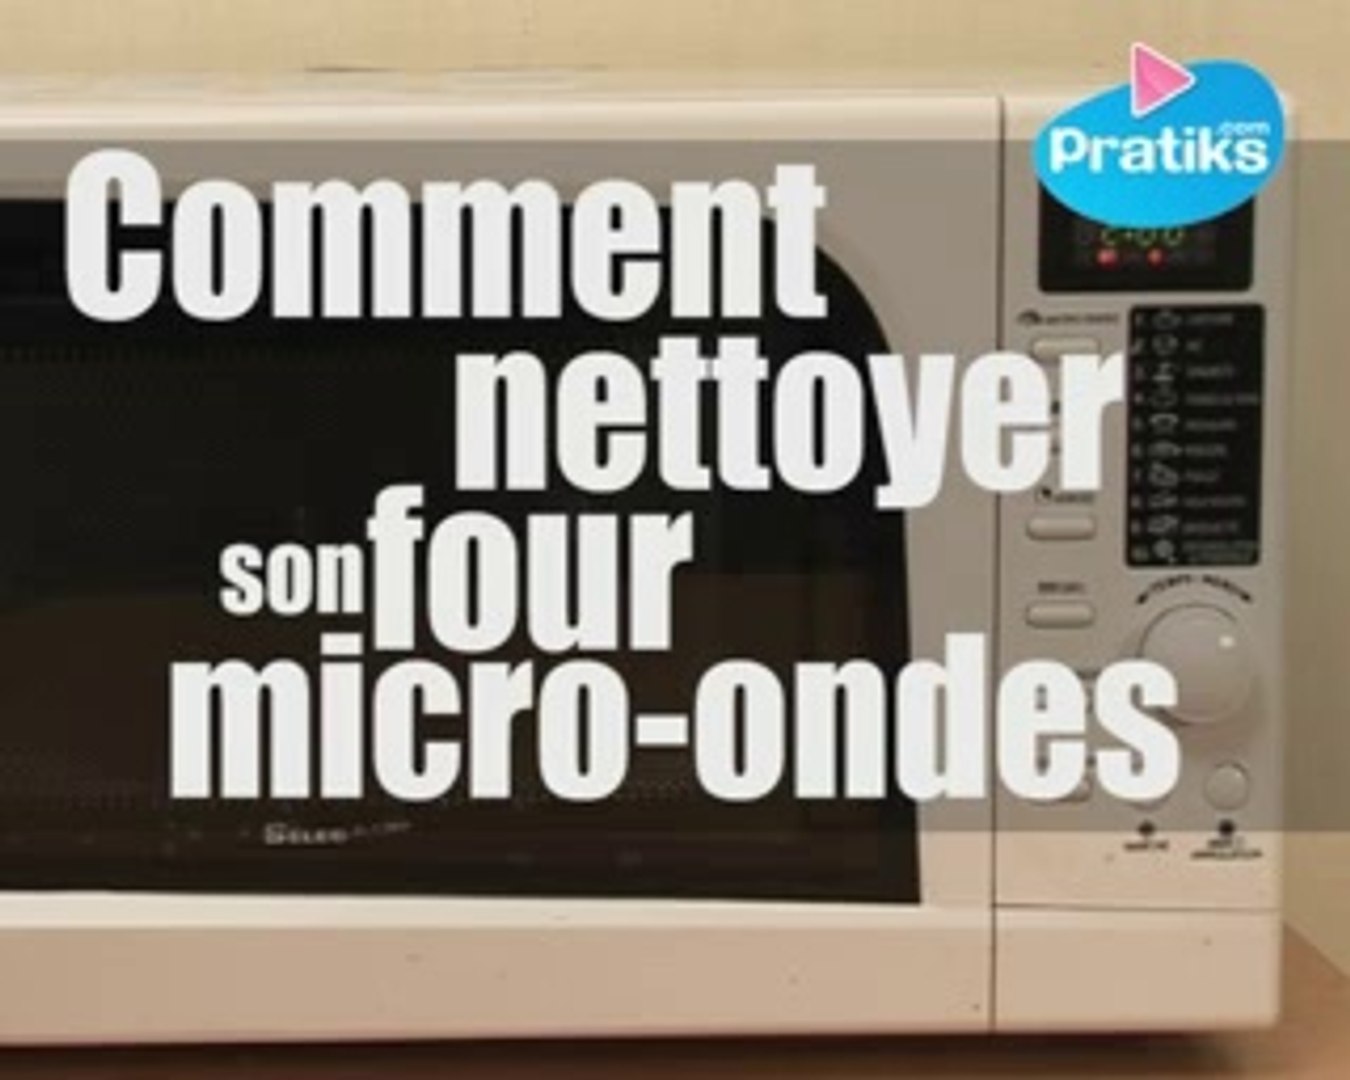 Comment nettoyer son four micro-ondes - Vidéo Dailymotion